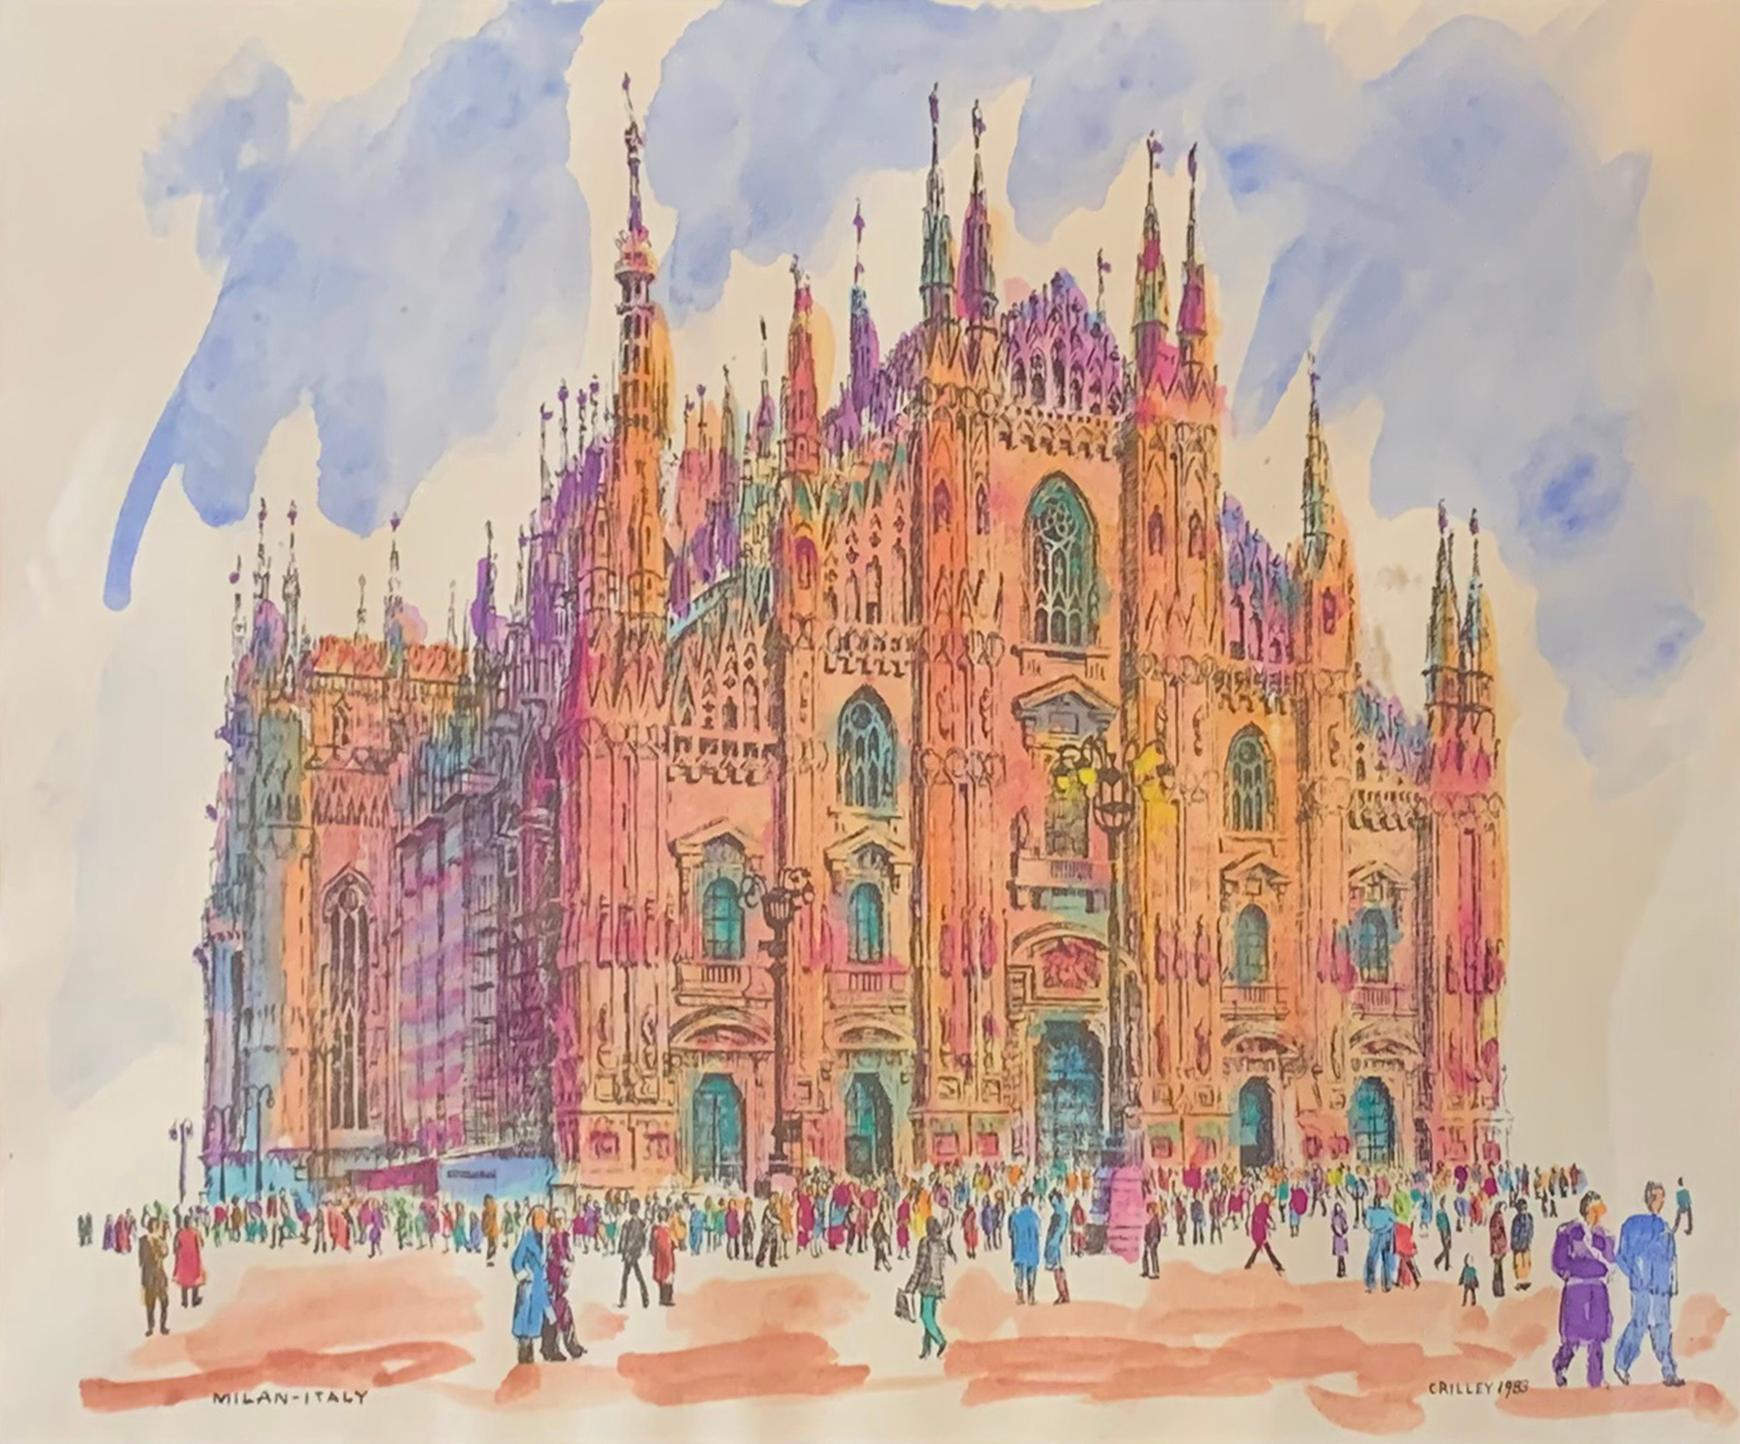 "Cathedral, Milan" by Joseph Crilley is a 8.25" x 11" watercolor on paper, architectural painting from 1983. It is signed and dated "Crilley 1983" in the lower right.

JOSEPH CRILLEY (1920-2008) Born in 1920, Joseph Crilley began to draw and paint